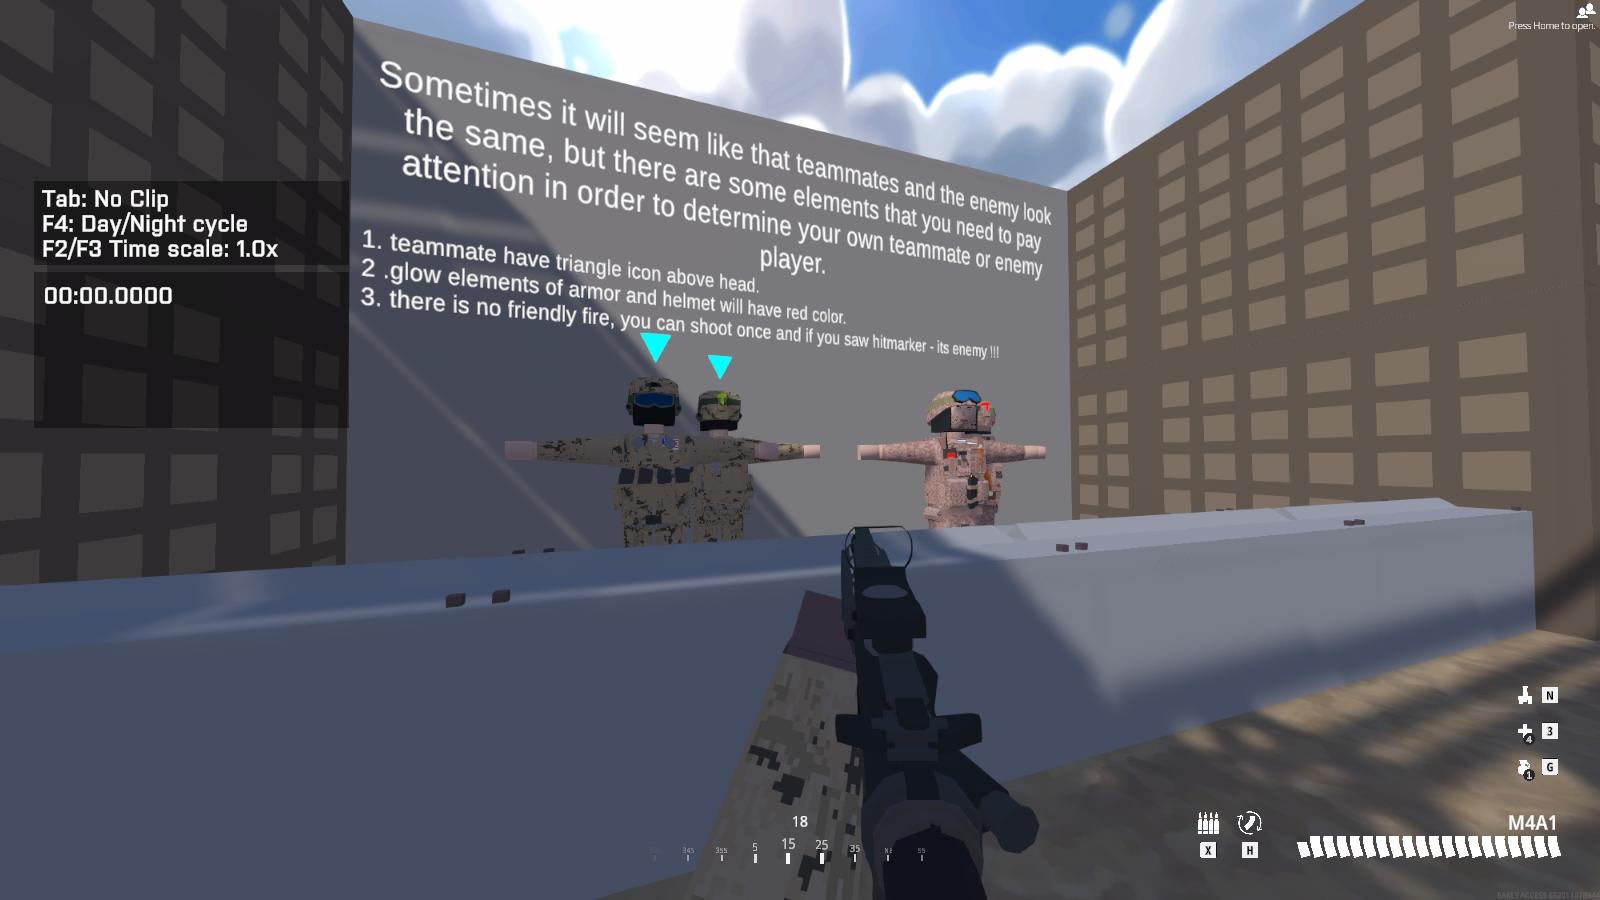 Attention Roblox adventurers! Get in on the action that's